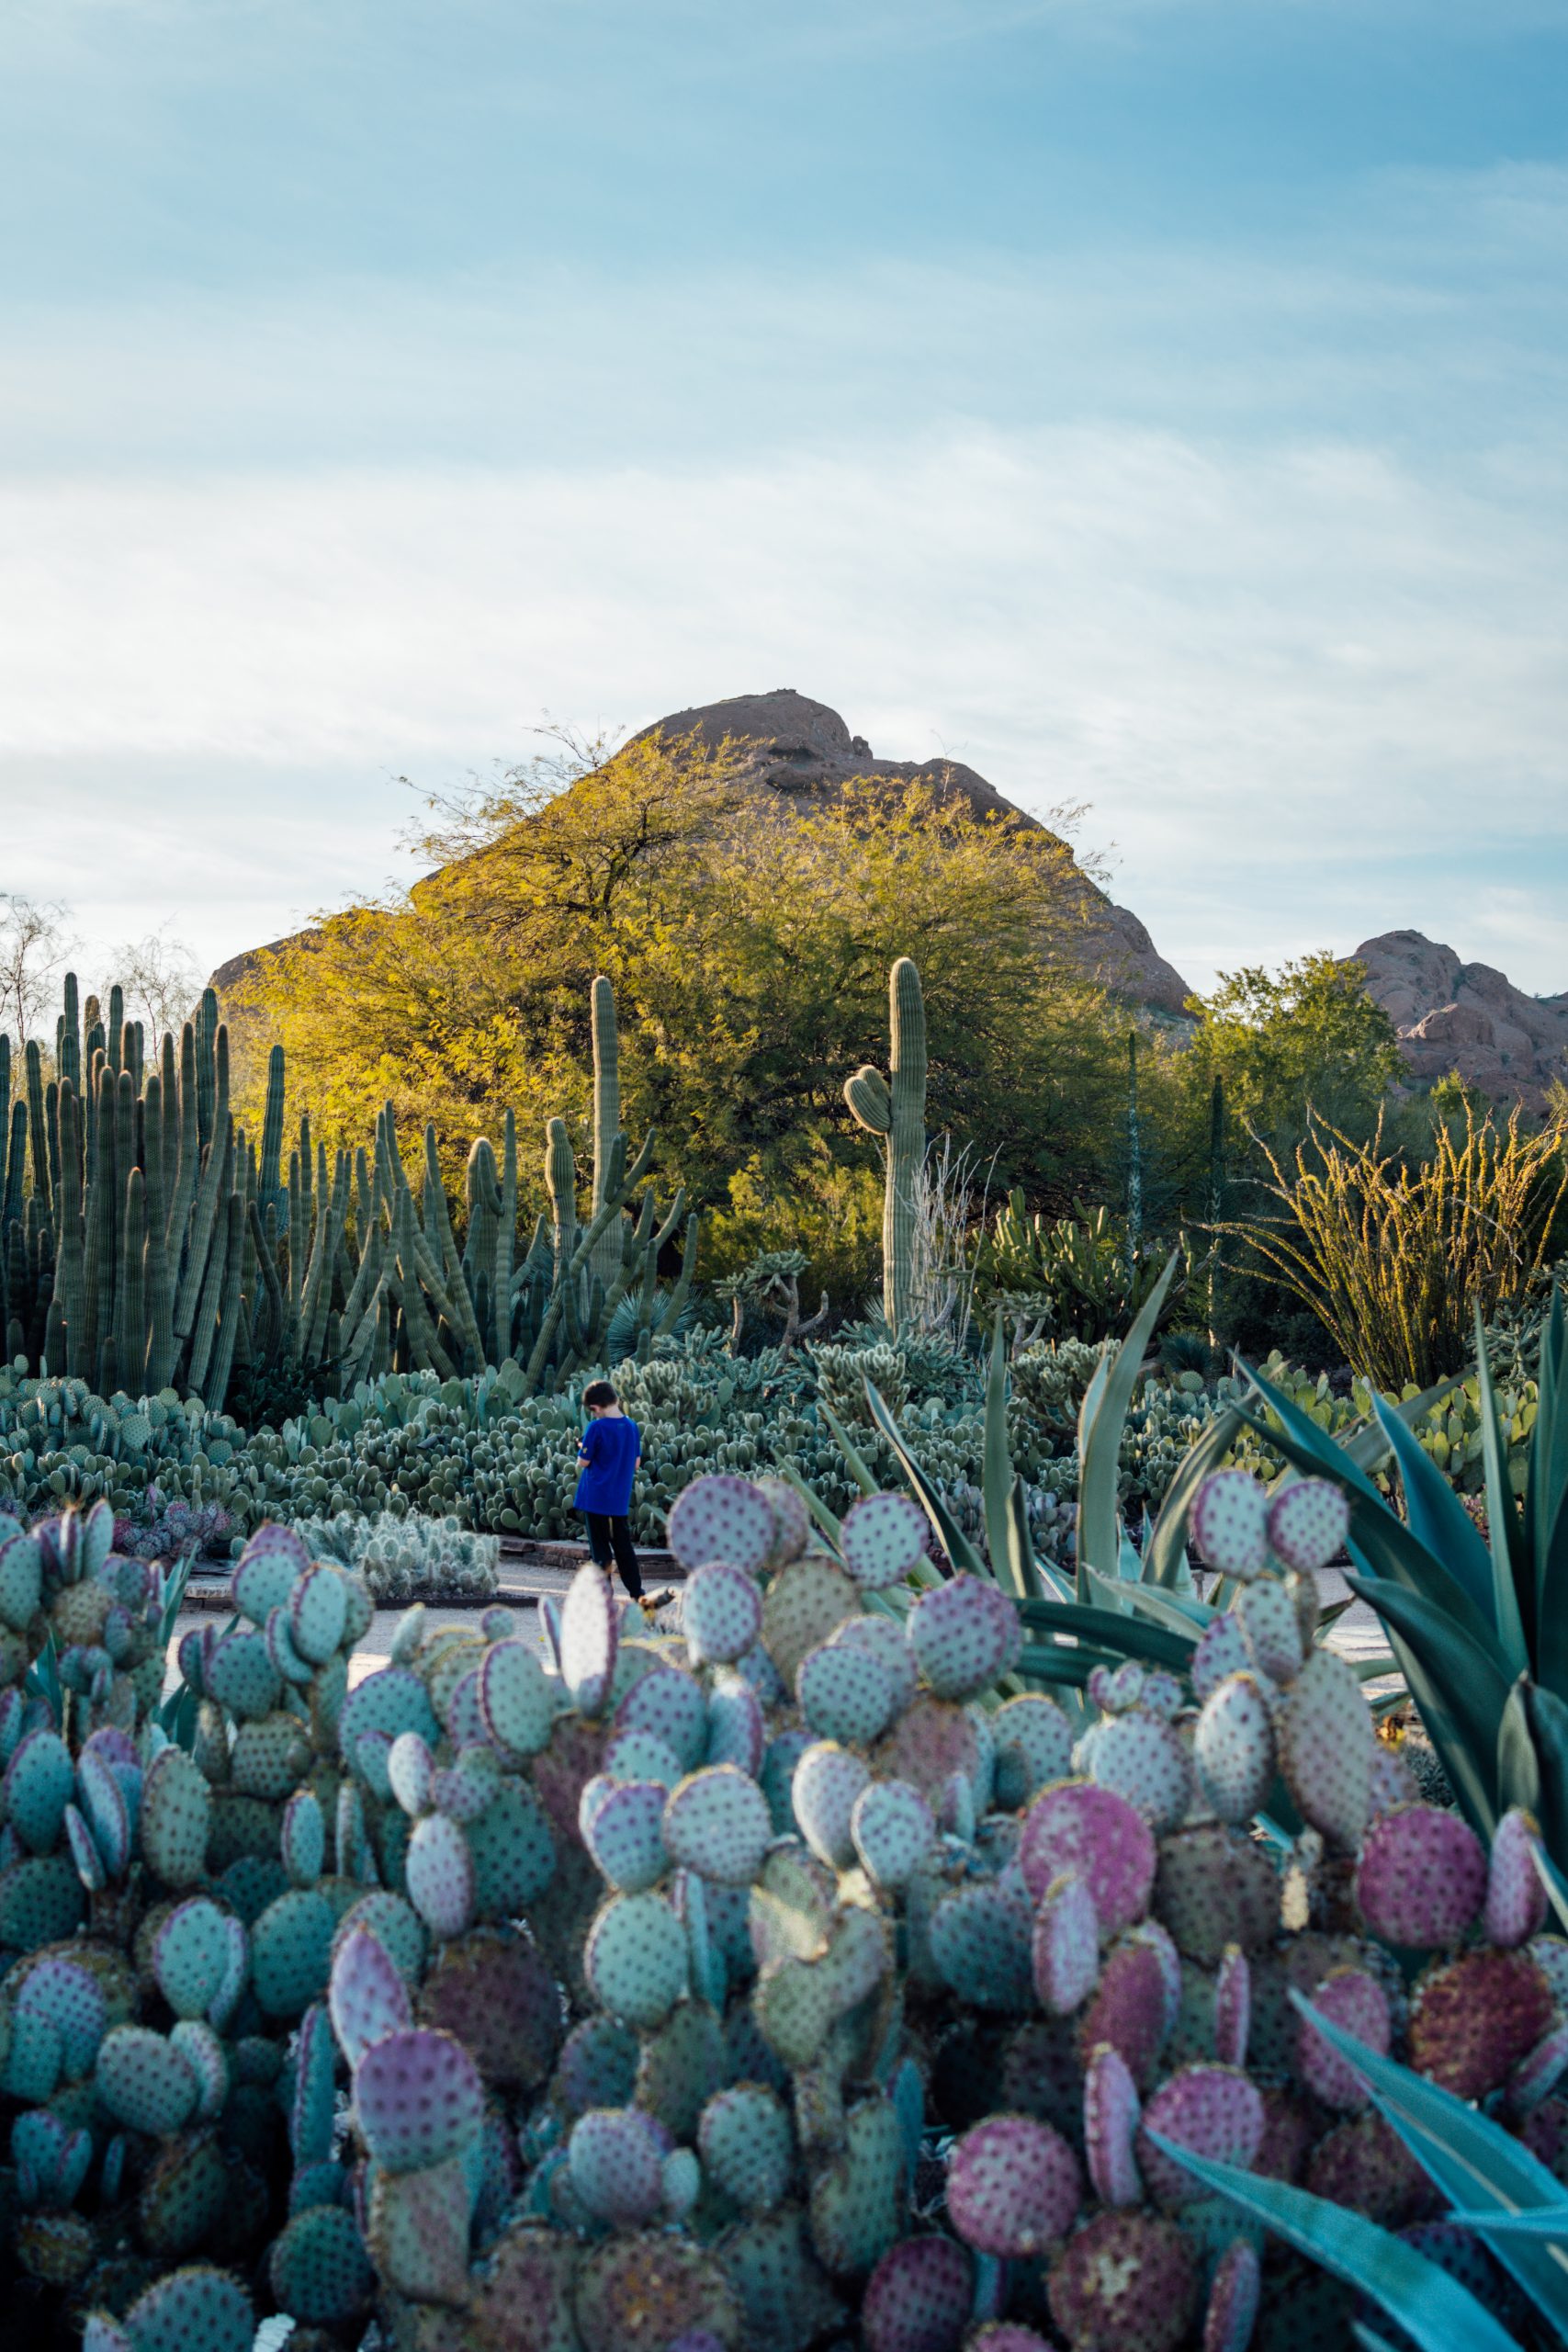 Photo of the back of a young person in a blue top surrounded by cacti with a mountain in the background.